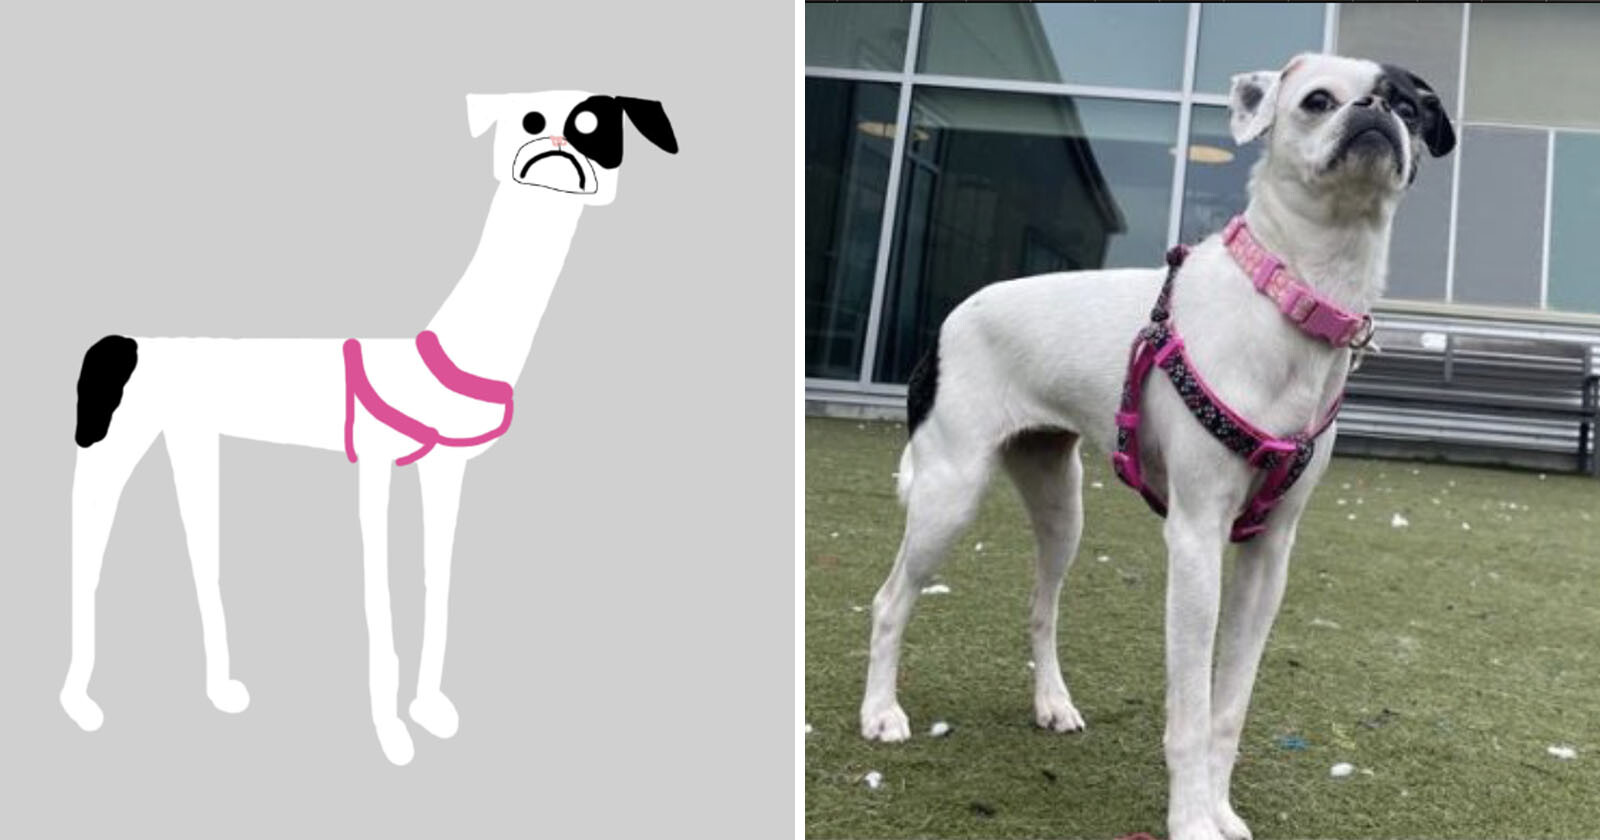 Animal Shelters Camera Broke So It Used Drawings to Inspire Adoption